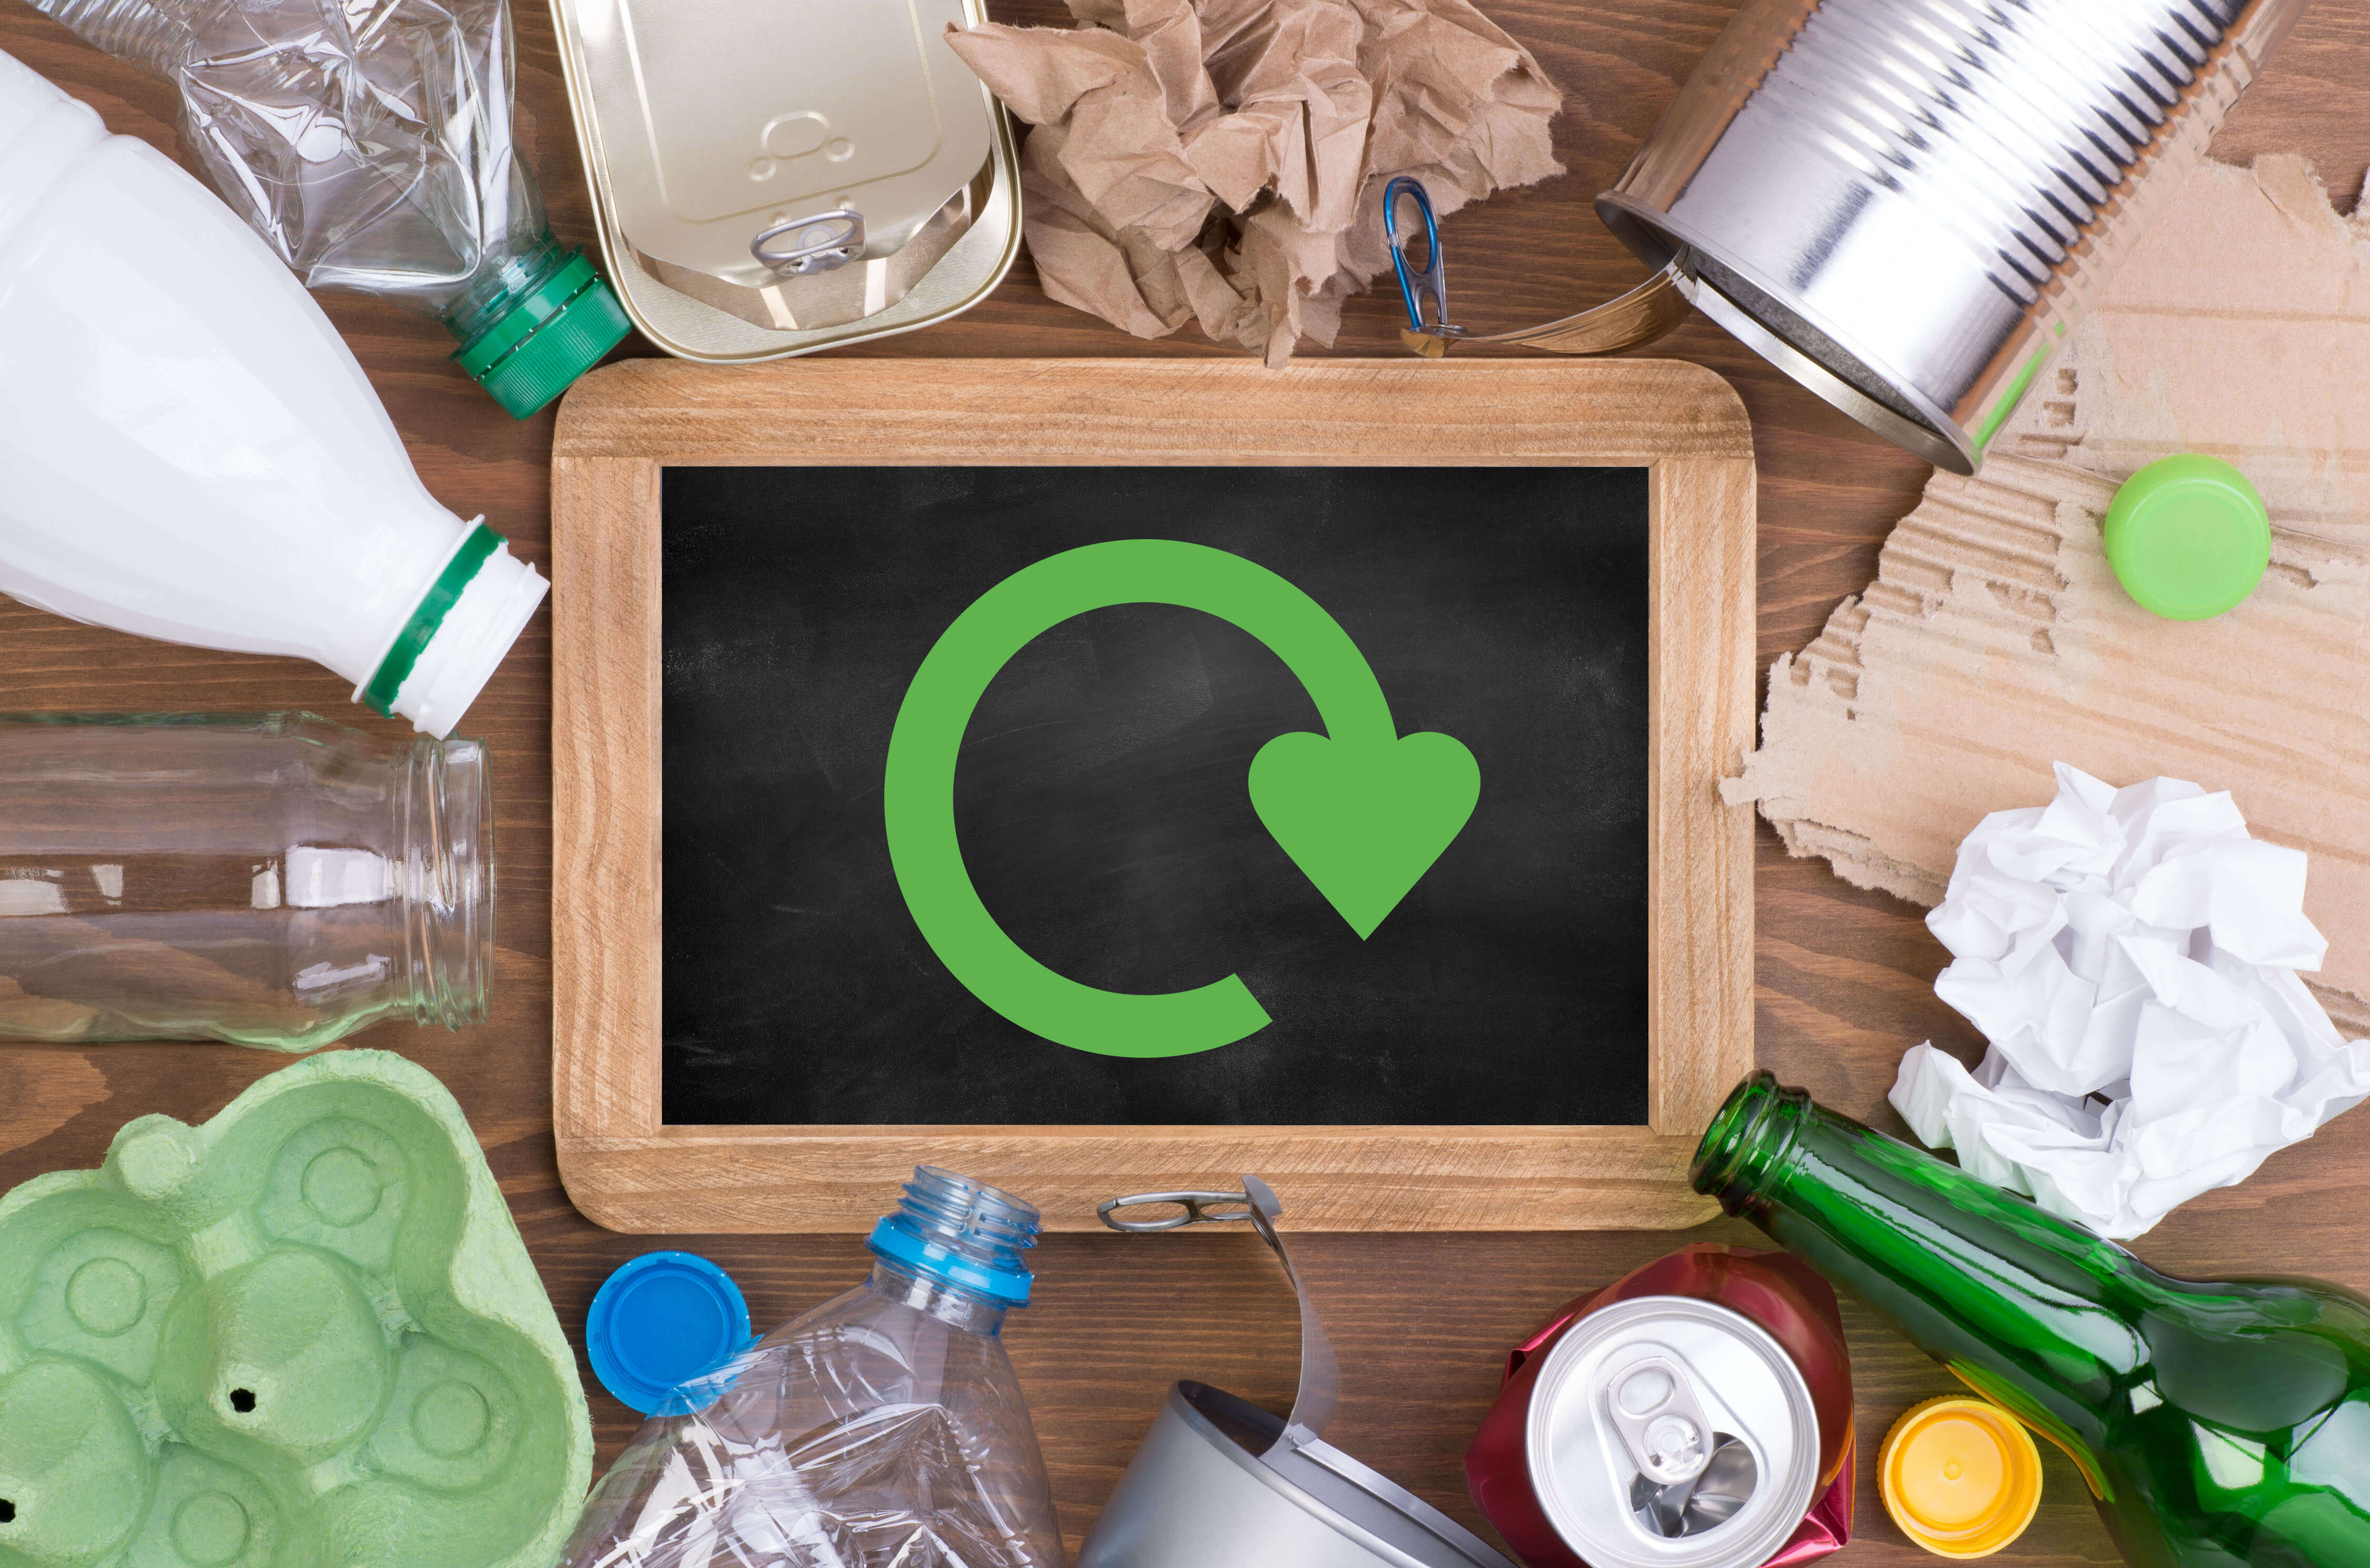 The Recycle for Scotland 'swoosh' logo on a board with various recyclable materials